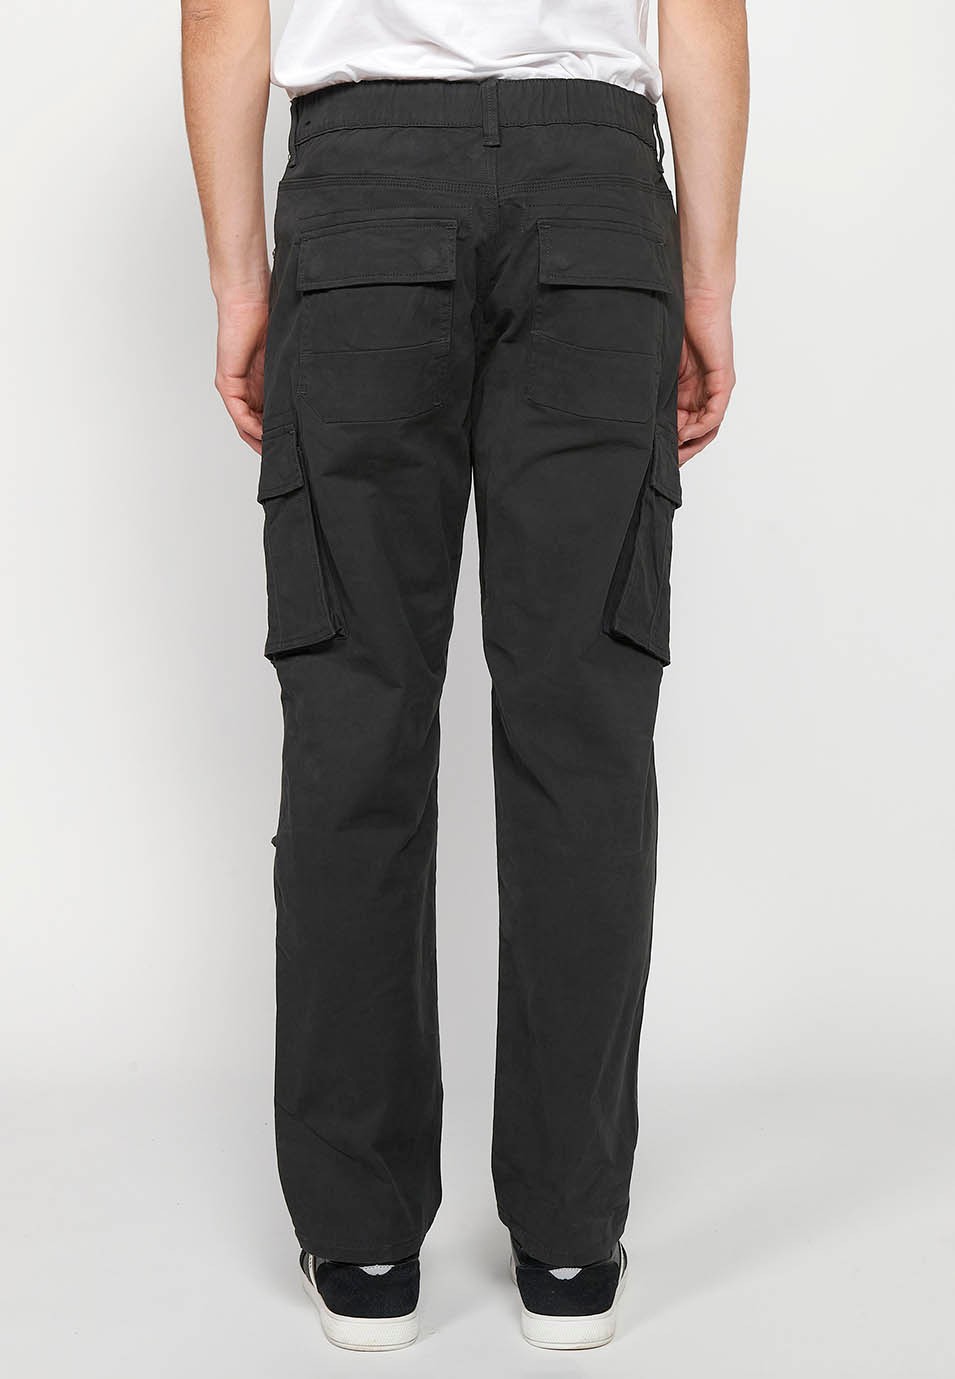 Long cargo pants with front zipper and button closure with side pockets with flap in Black for Men